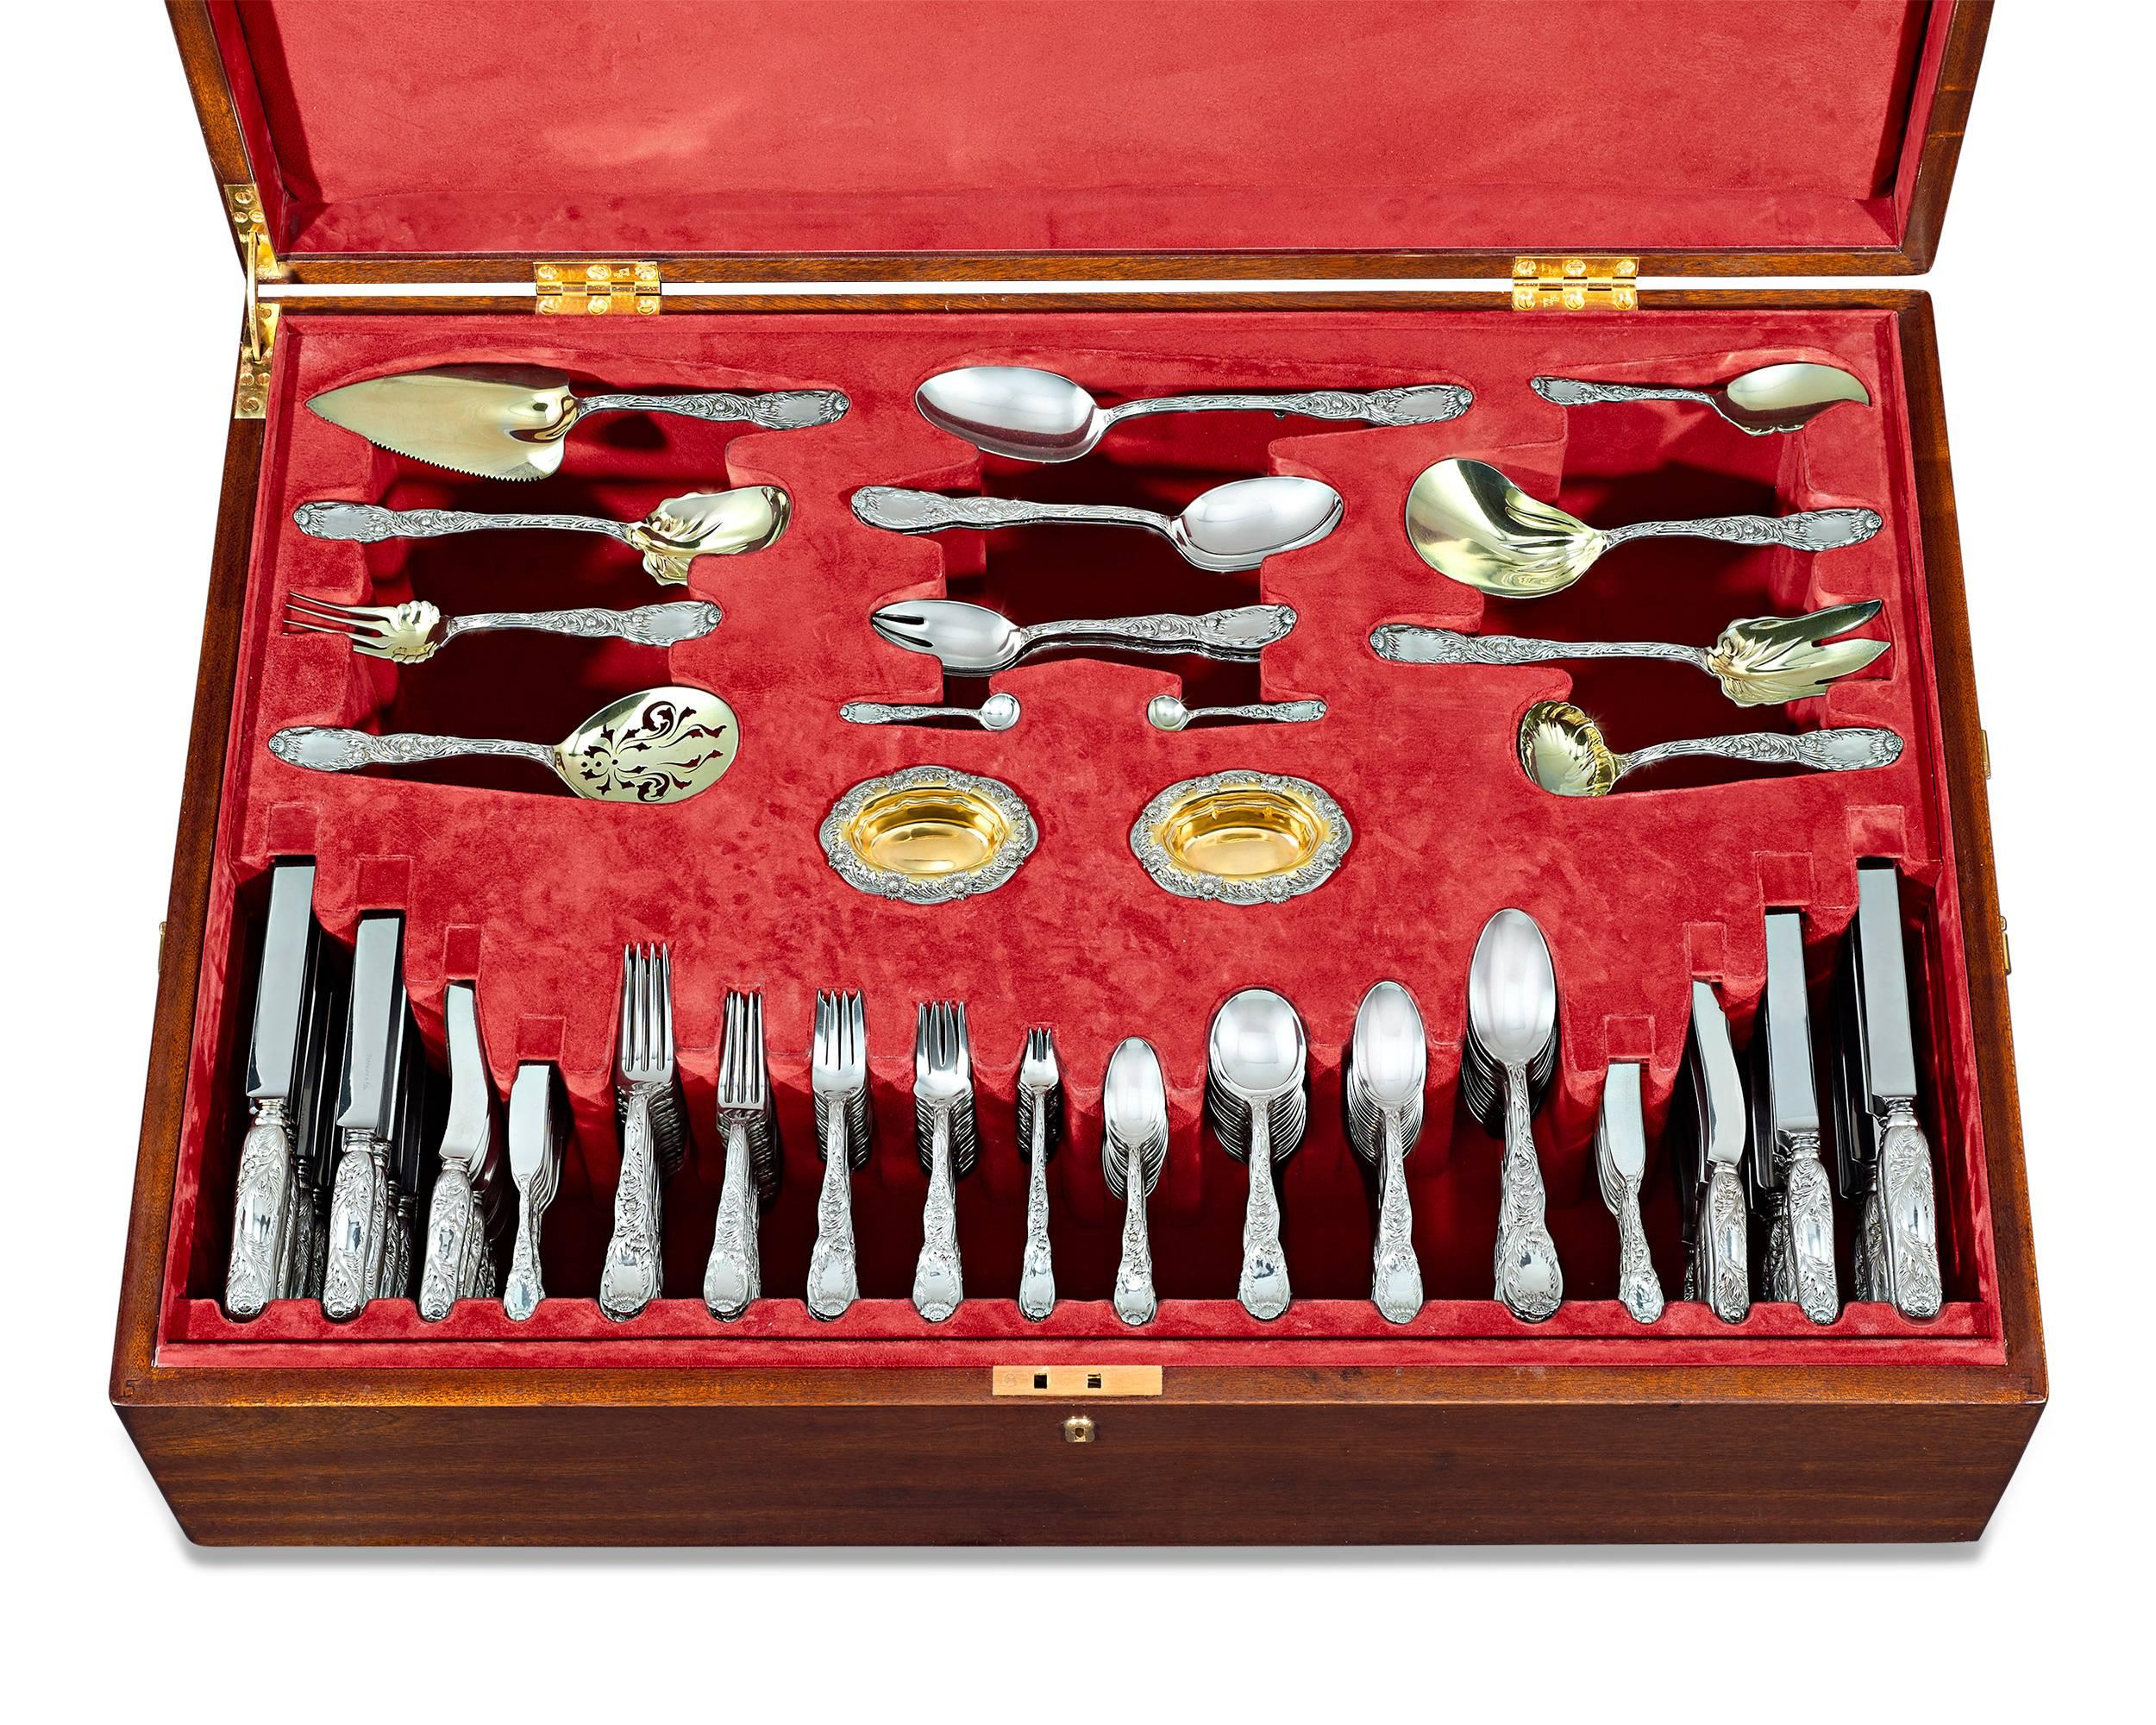 Masterfully crafted in the singular Tiffany & Co. style, this exceptional sterling silver flatware service epitomizes fine dining. The extensive service for 18 is crafted in the Chrysanthemum pattern, the most highly desirable of all of Tiffany’s